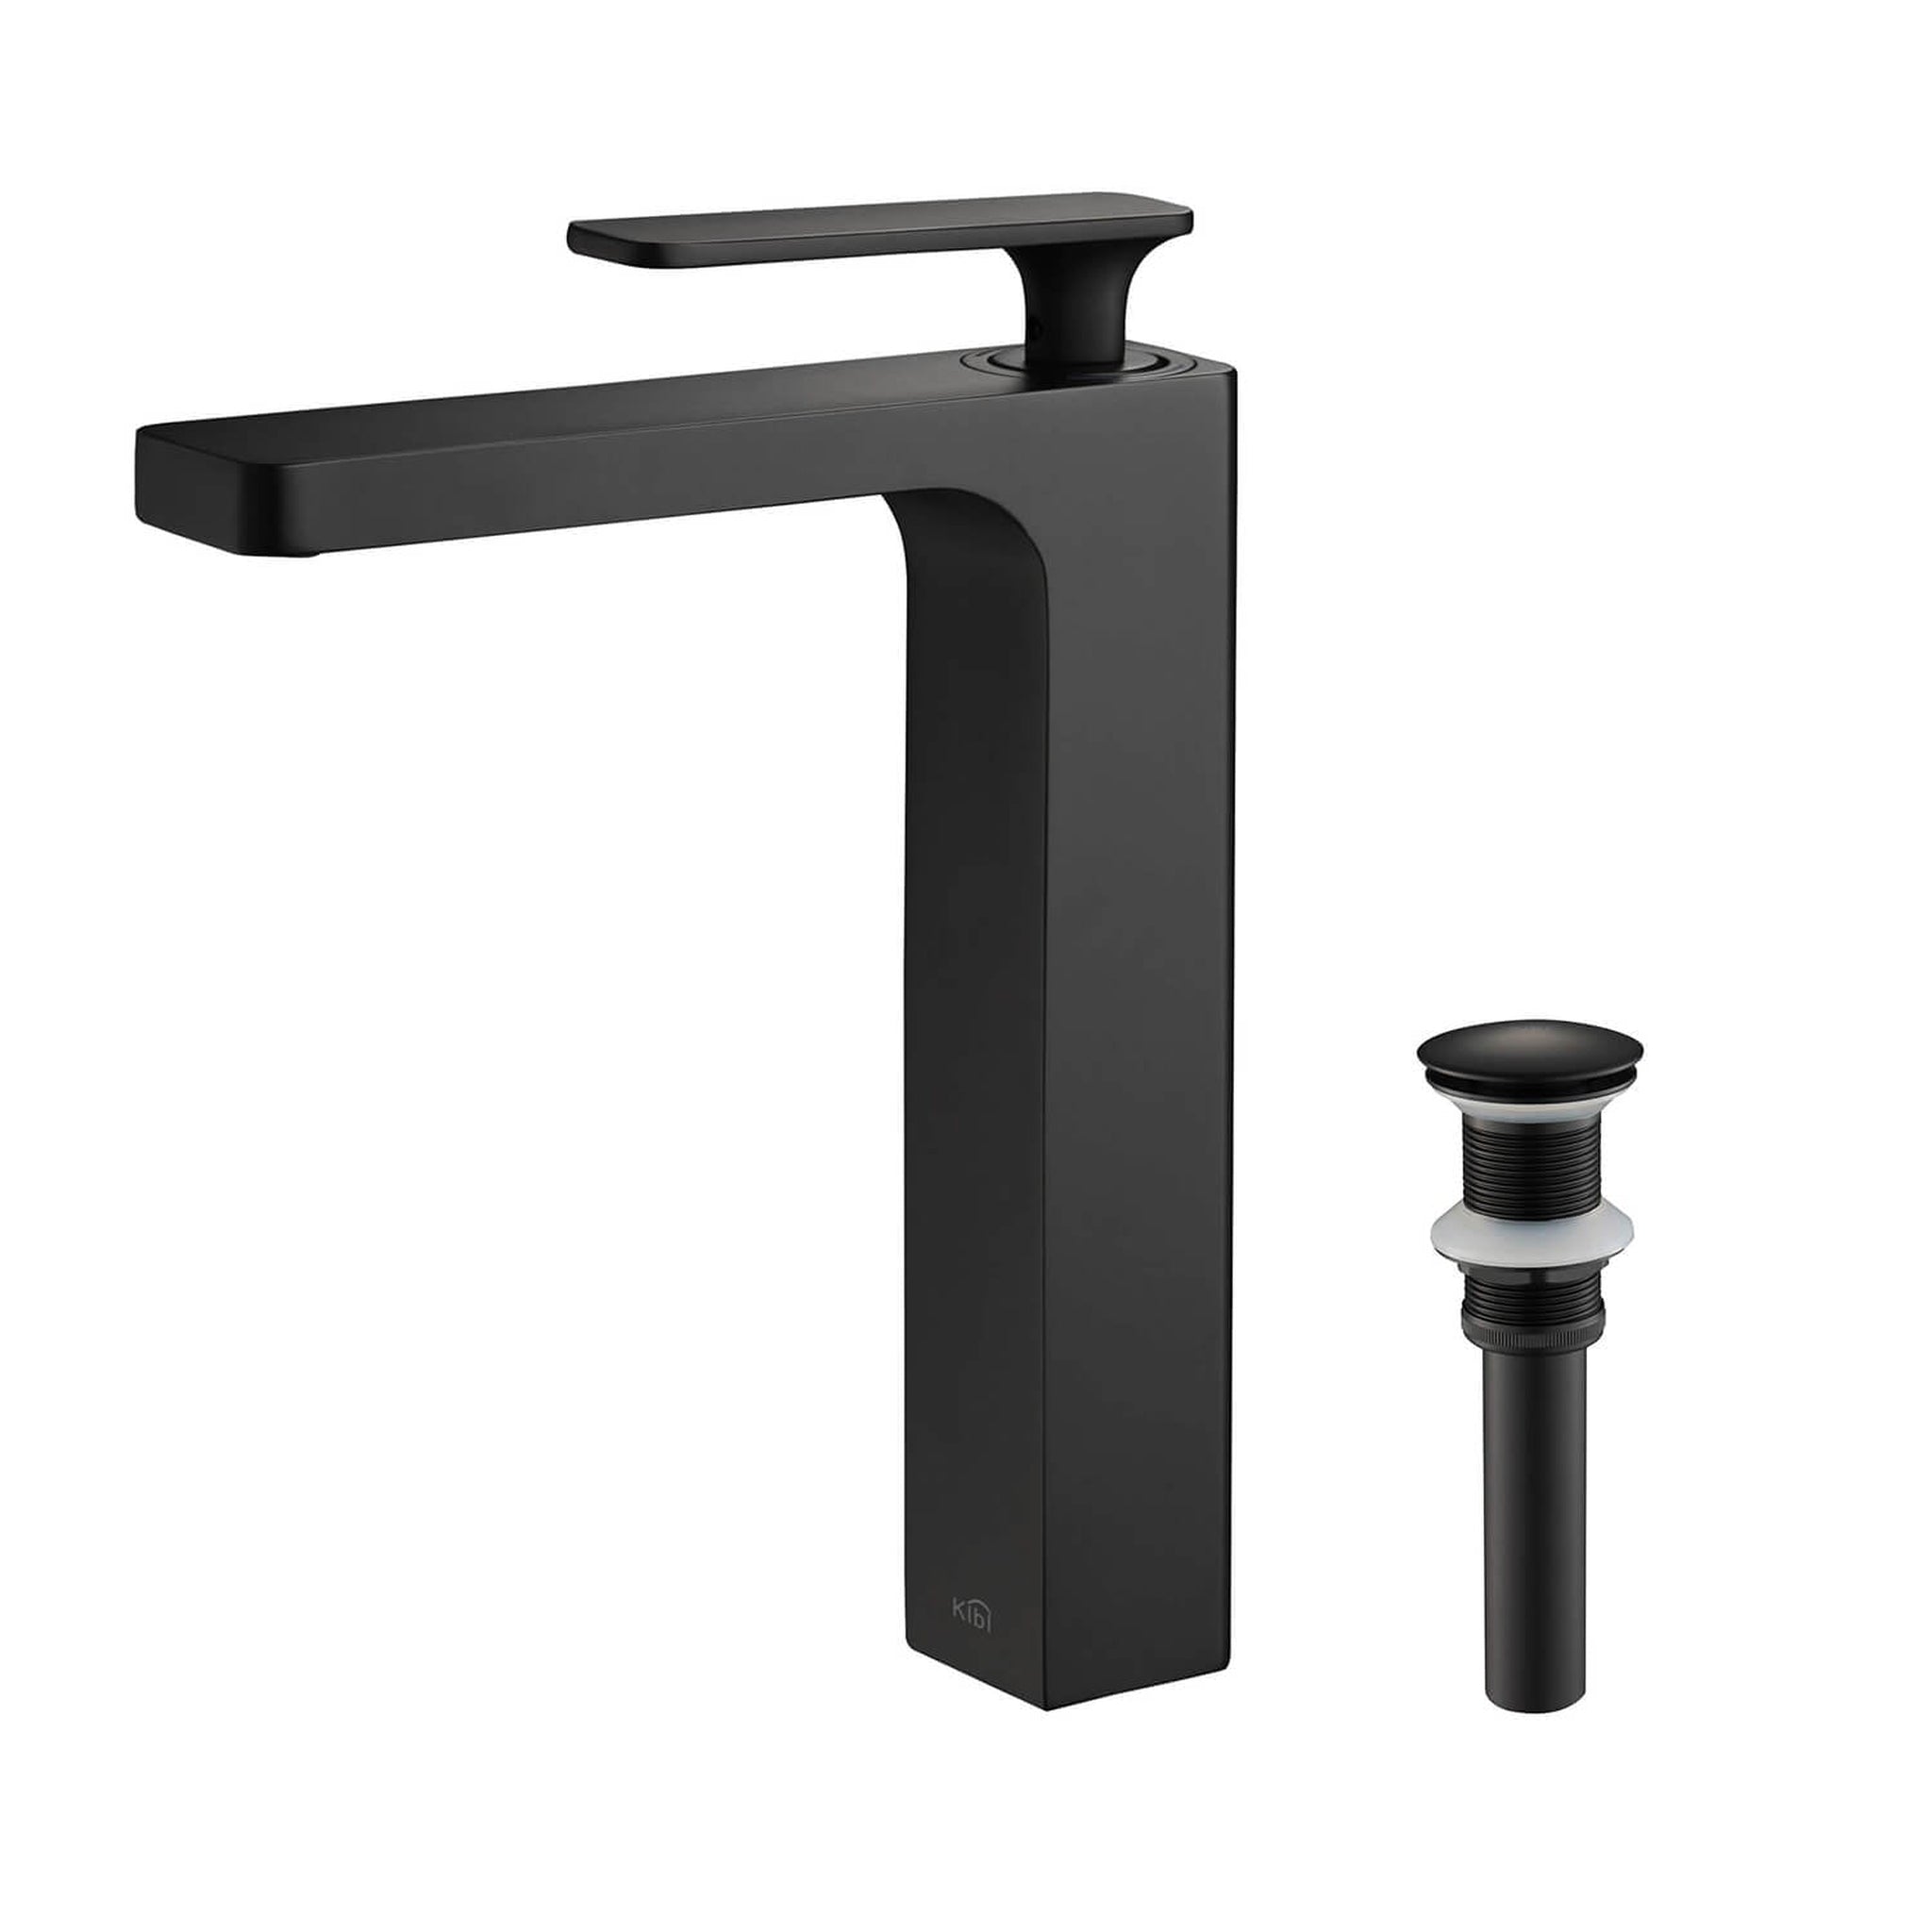 KIBI, KIBI Infinity Single Handle Matte Black Solid Brass Bathroom Vanity Vessel Sink Faucet With Pop-Up Drain Stopper Small Cover Without Overflow